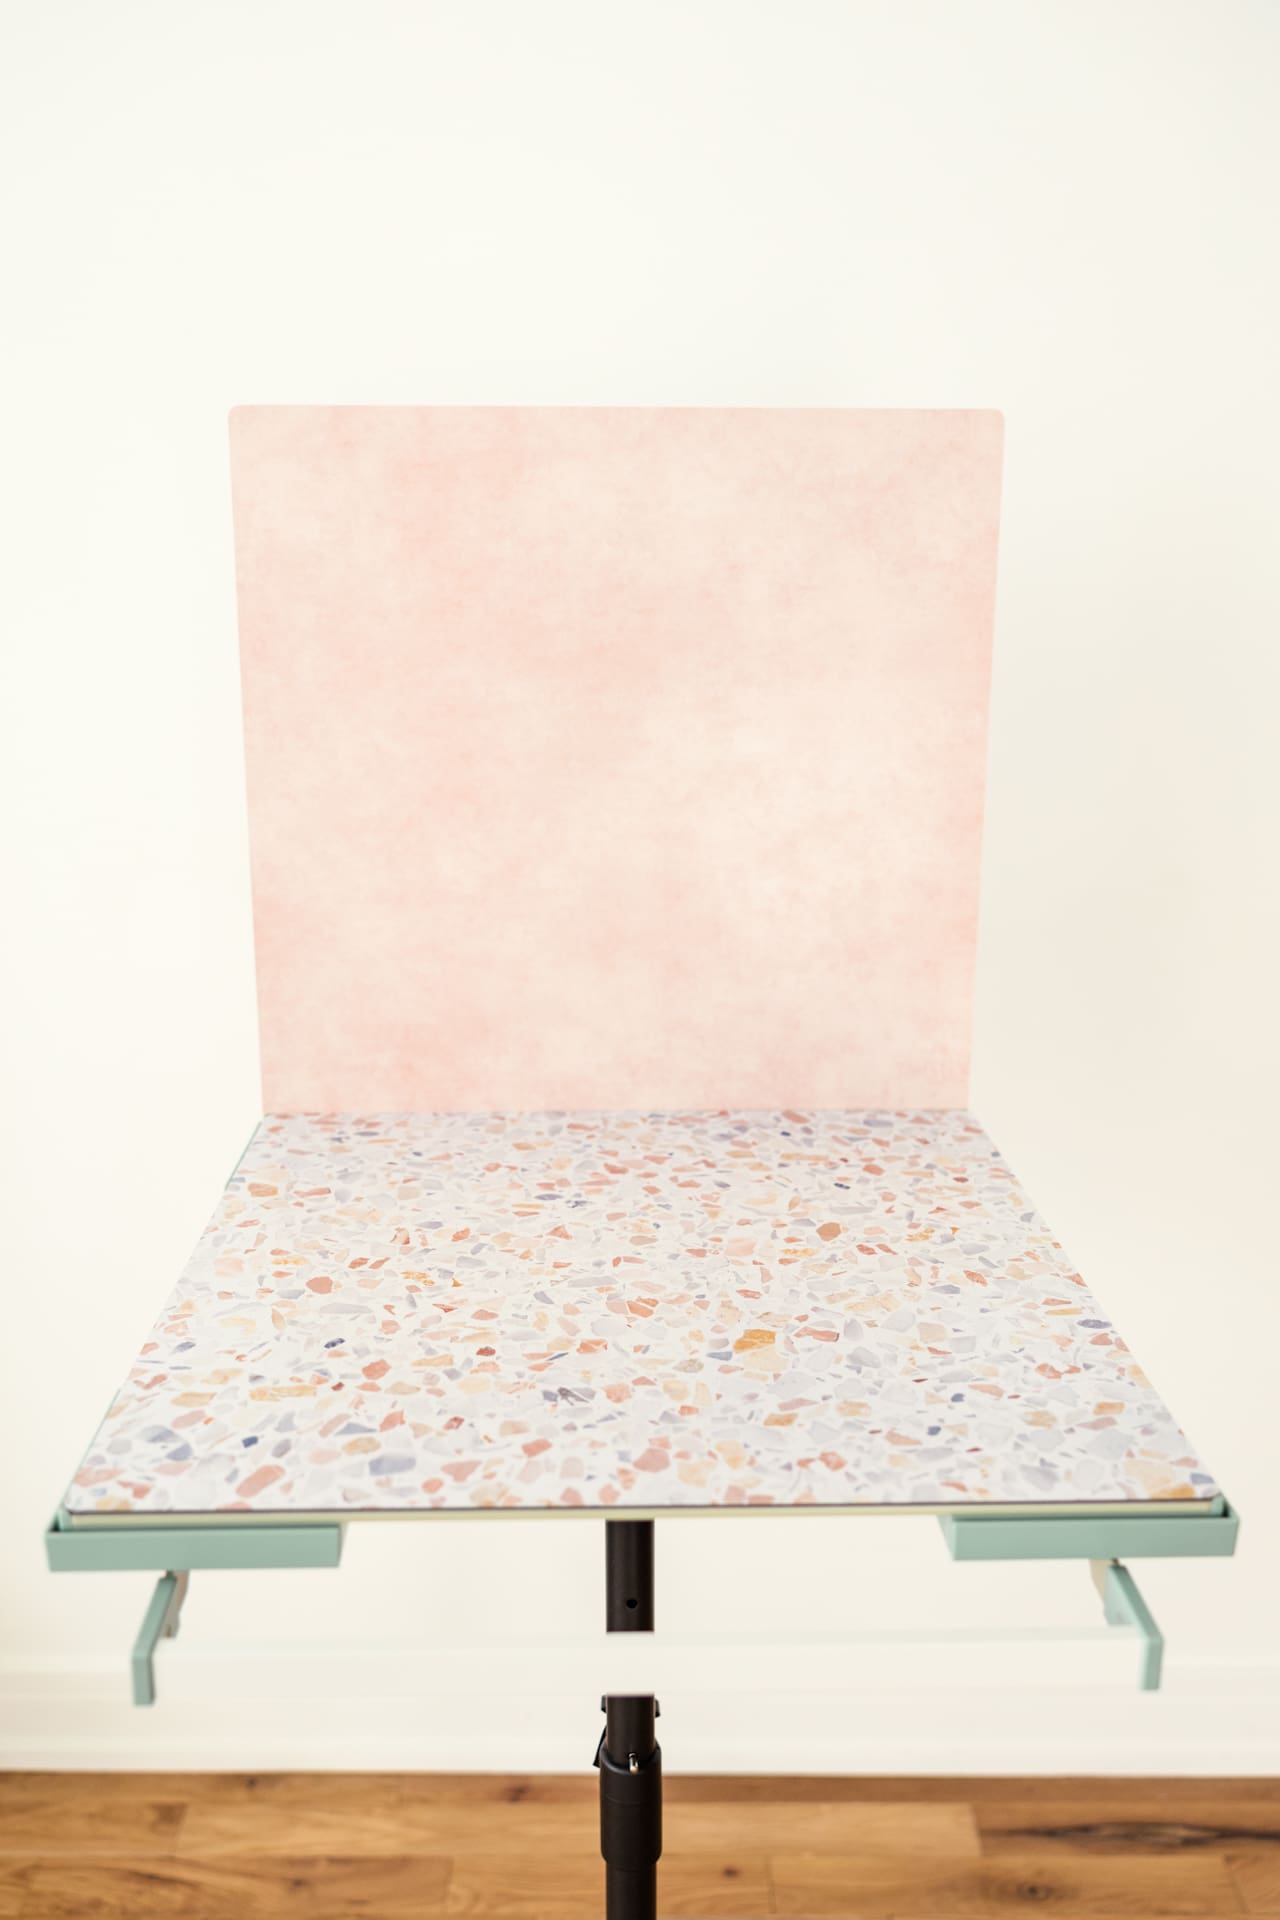 Replica Surfaces® Sunset Peach and Sunsoaked Terrazzo set up at Chicago photography studio P&M Studio